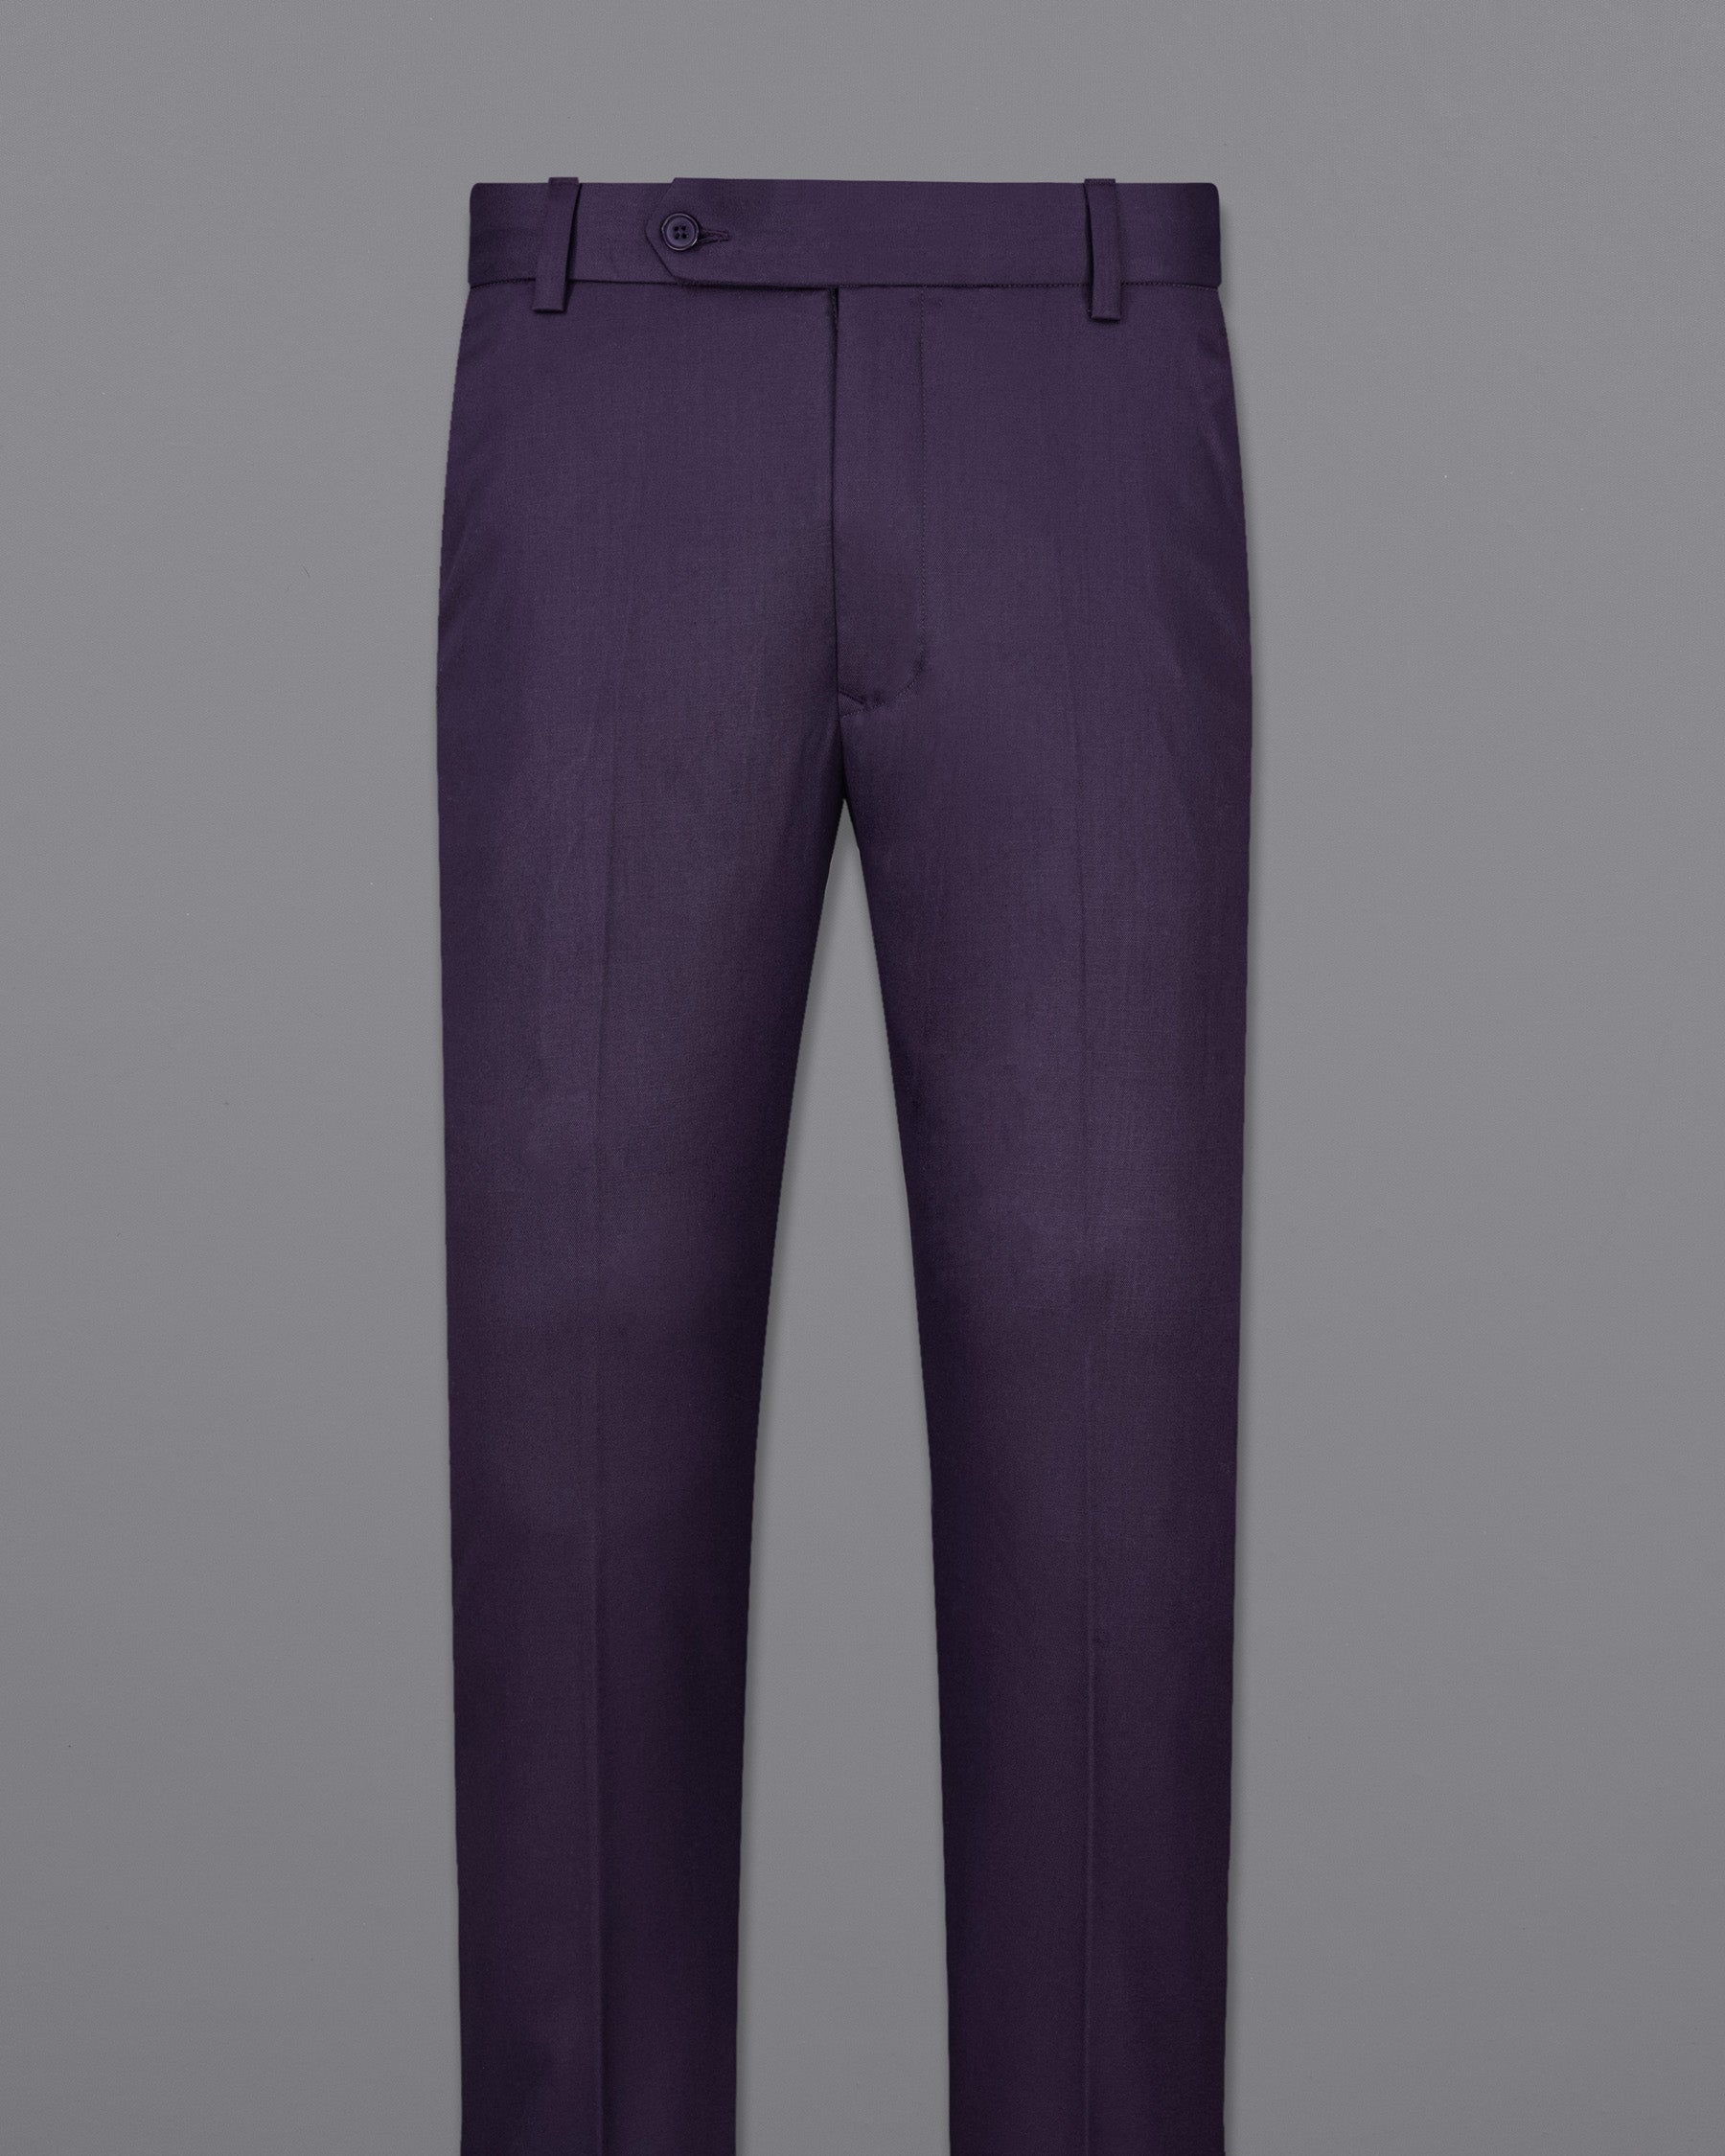 DL Fashion Regular Fit Women Purple Trousers - Buy DL Fashion Regular Fit  Women Purple Trousers Online at Best Prices in India | Flipkart.com